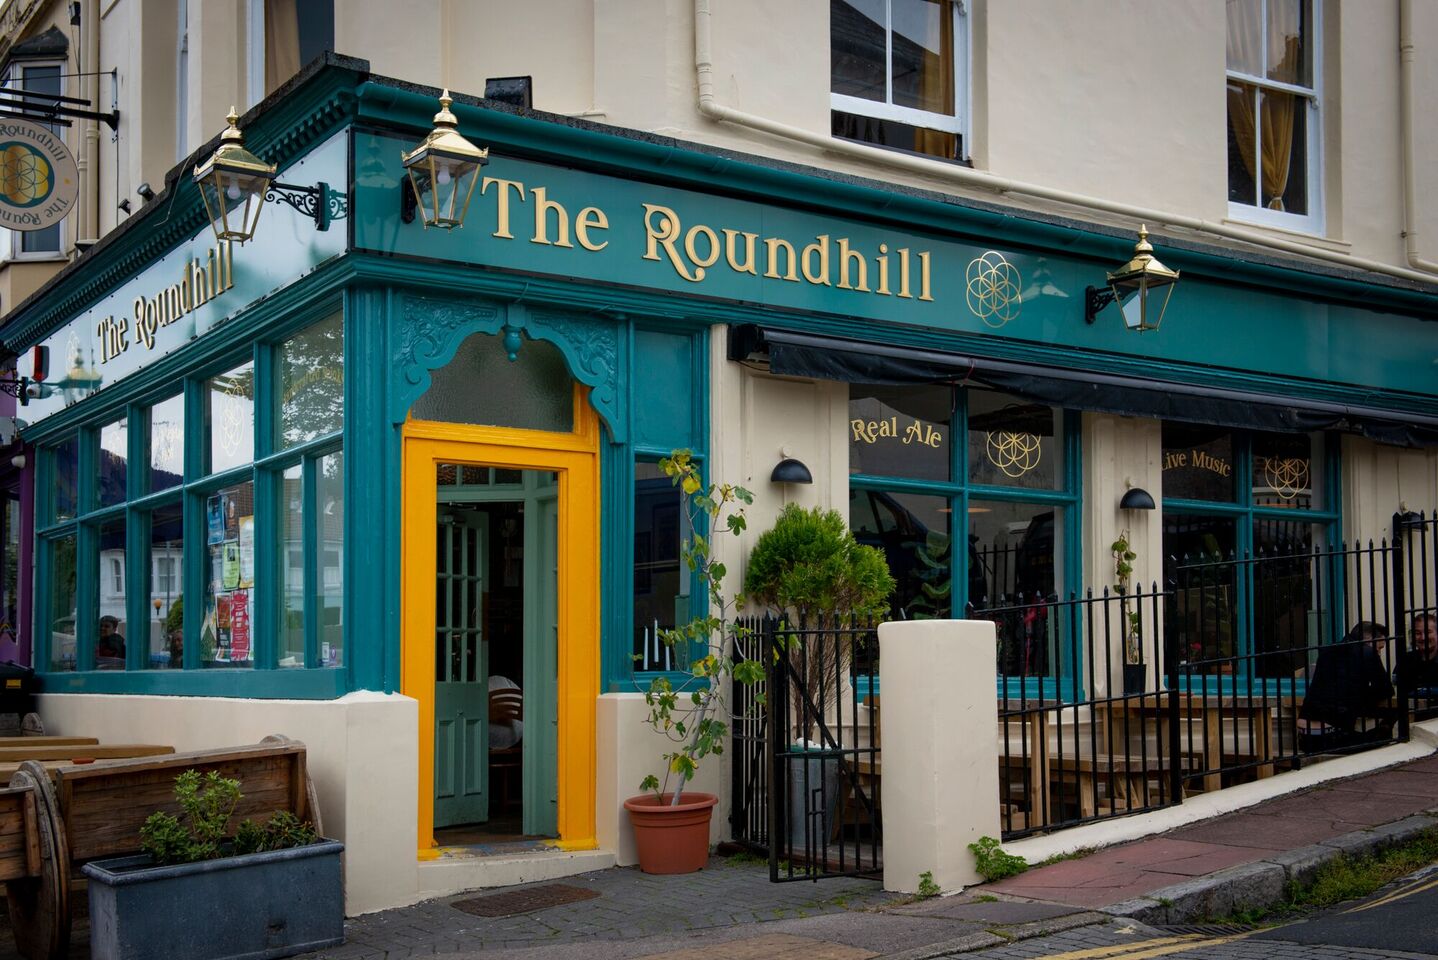 A photo of The Roundhill